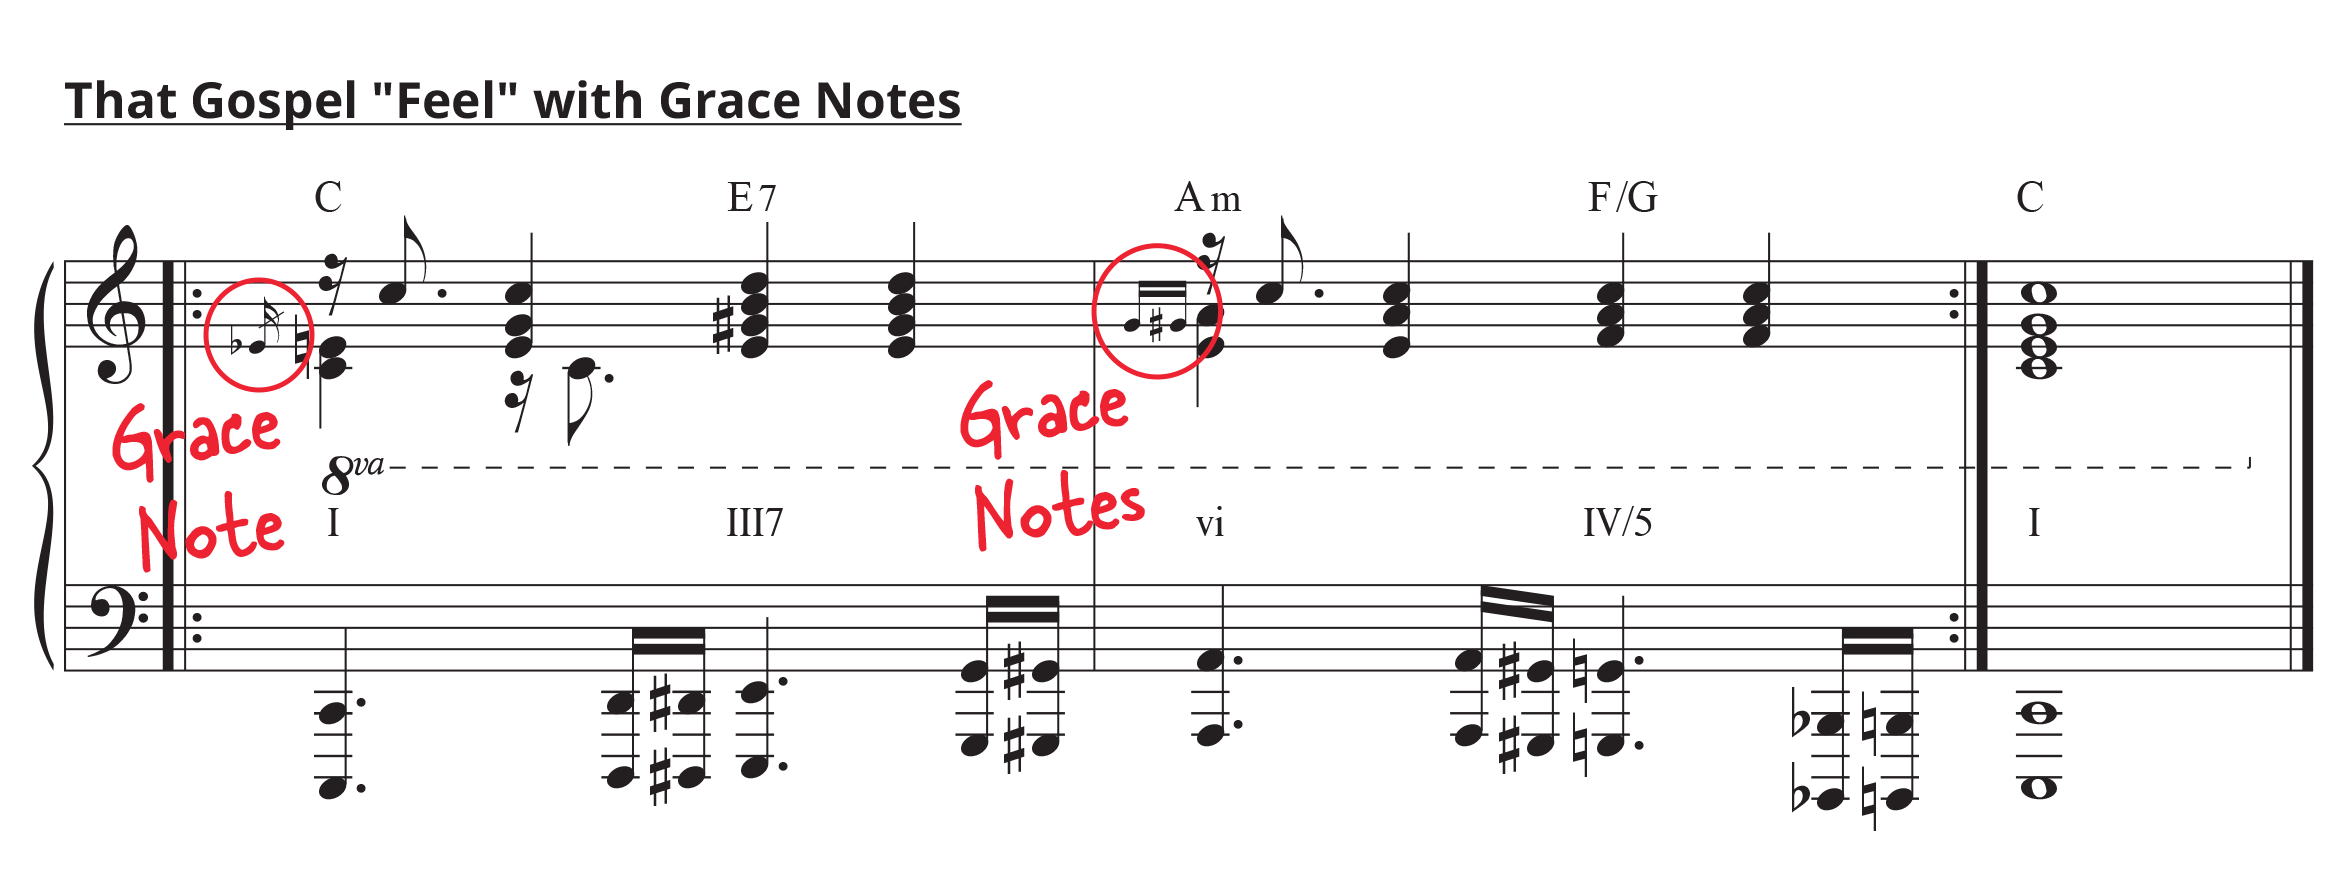 Standard notation of gospel progression "feel" with grace notes.